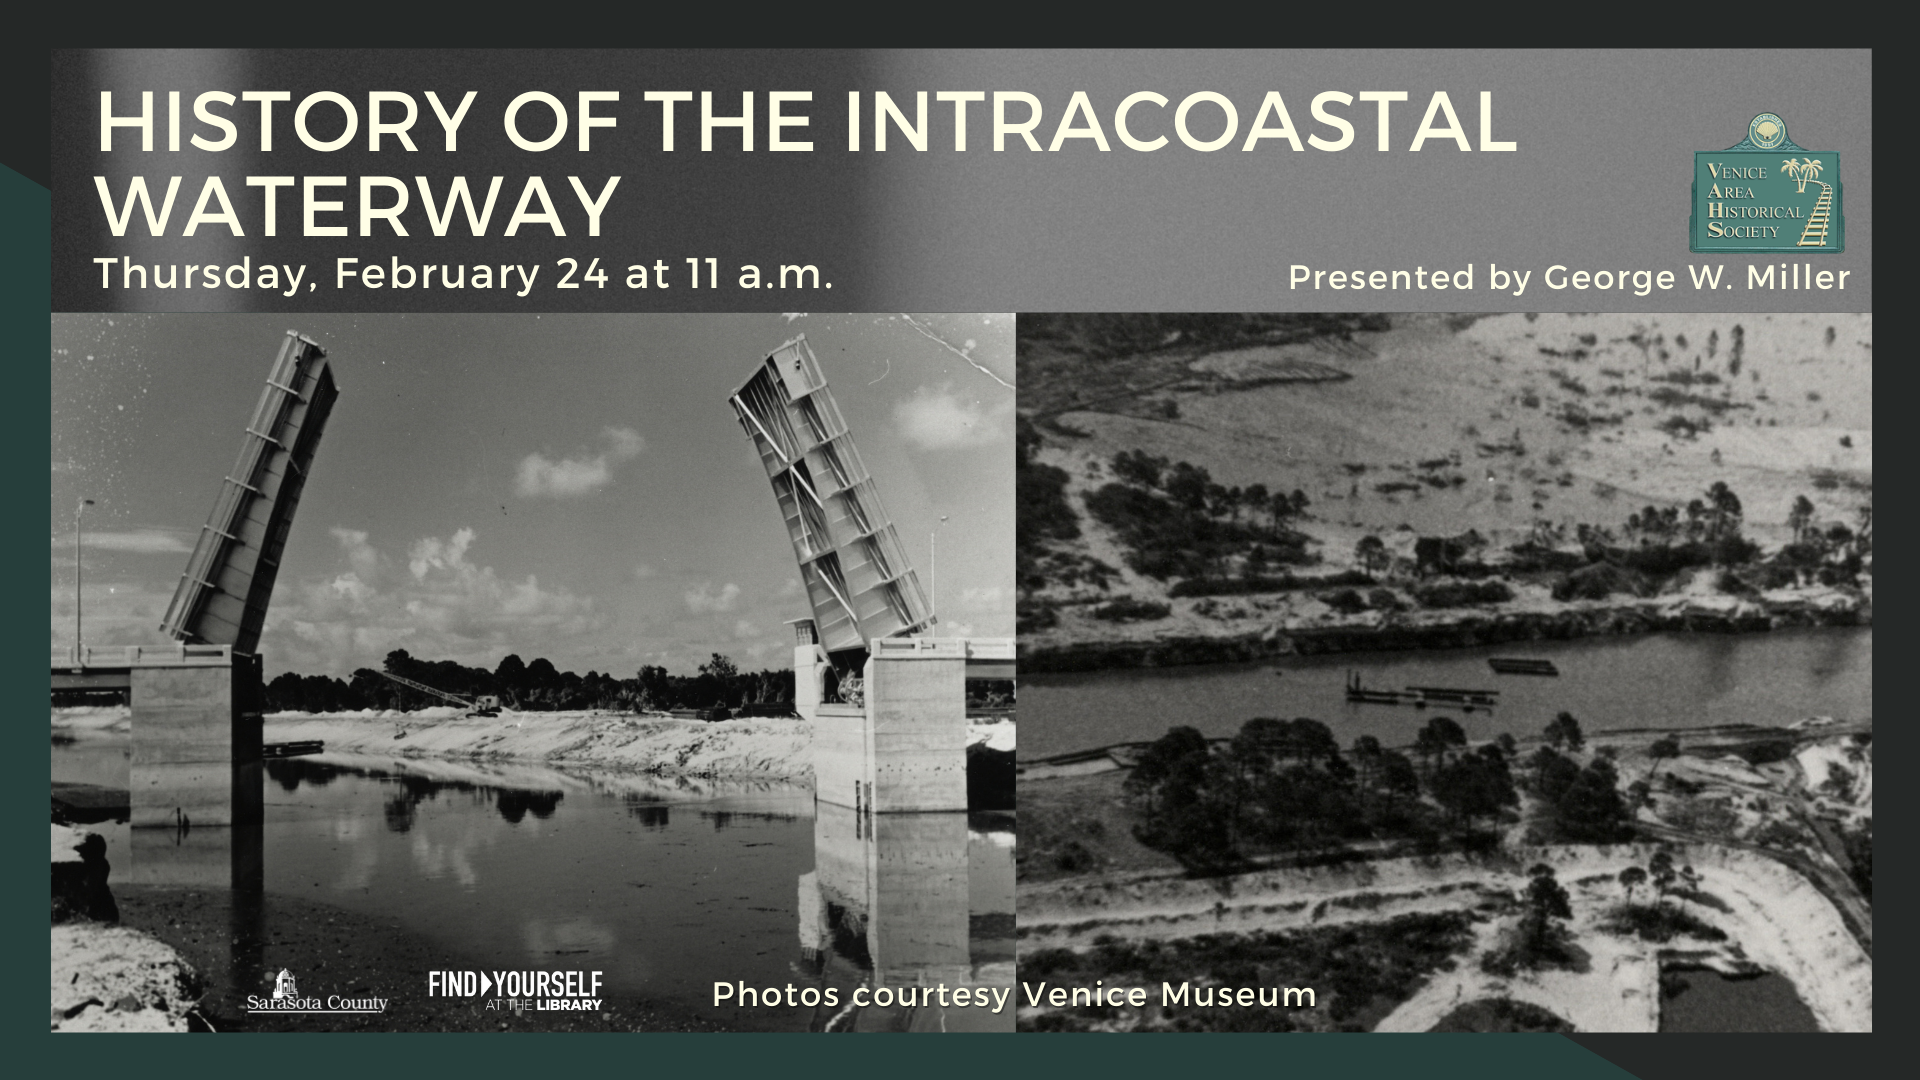 Historical images of Intracoastal Waterway